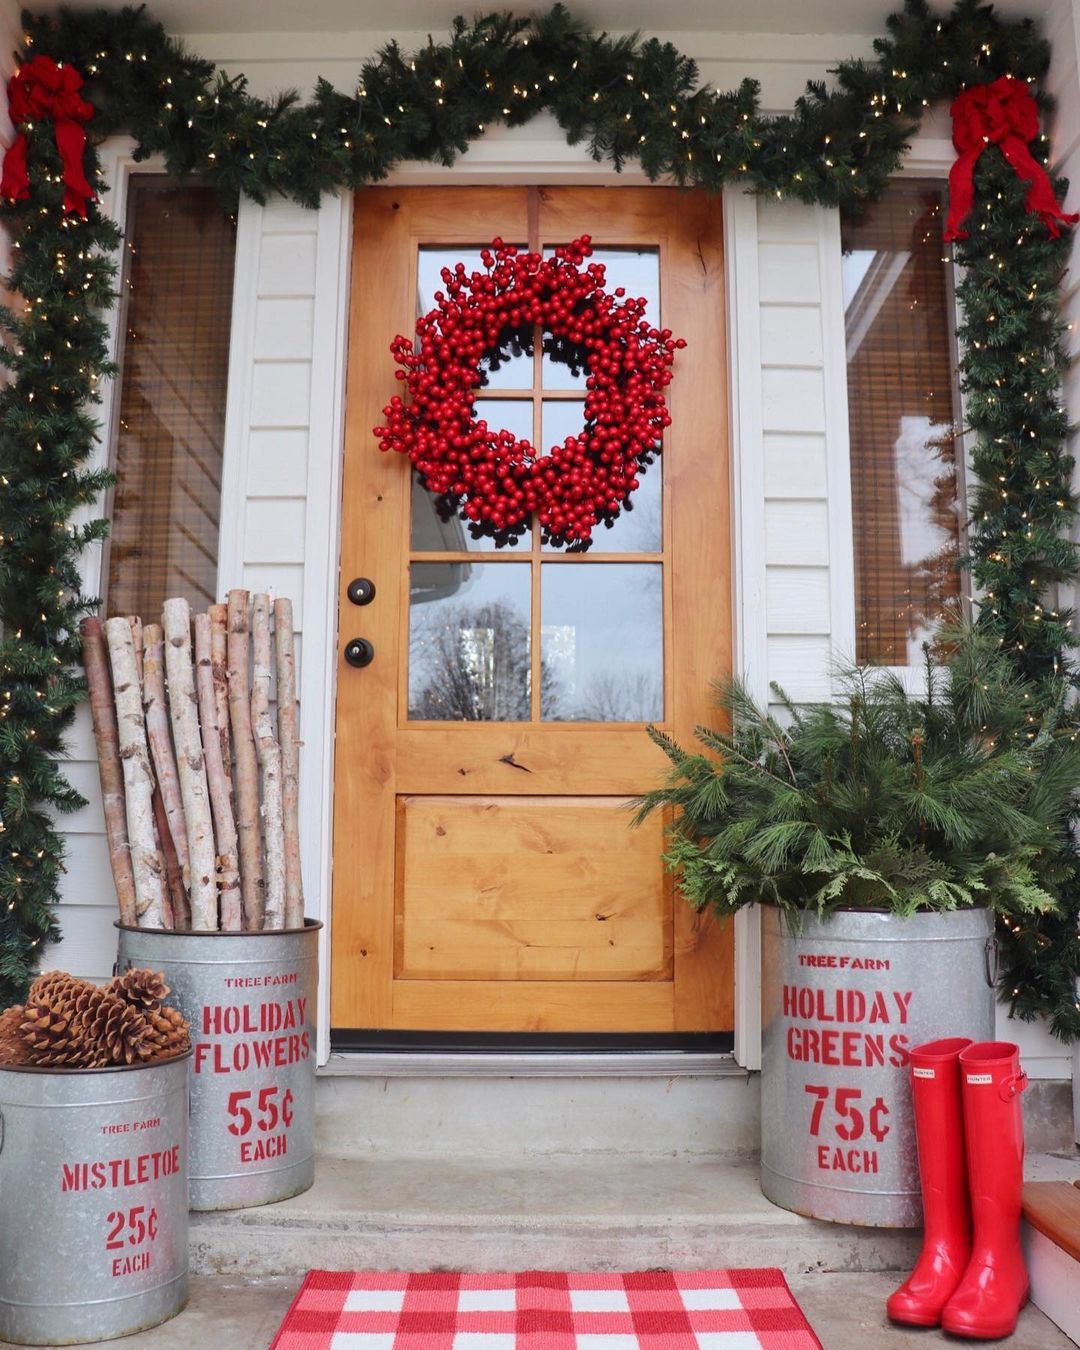 Large wreath made of cranberries hanging on a front door. Photo by @randilynnblog.